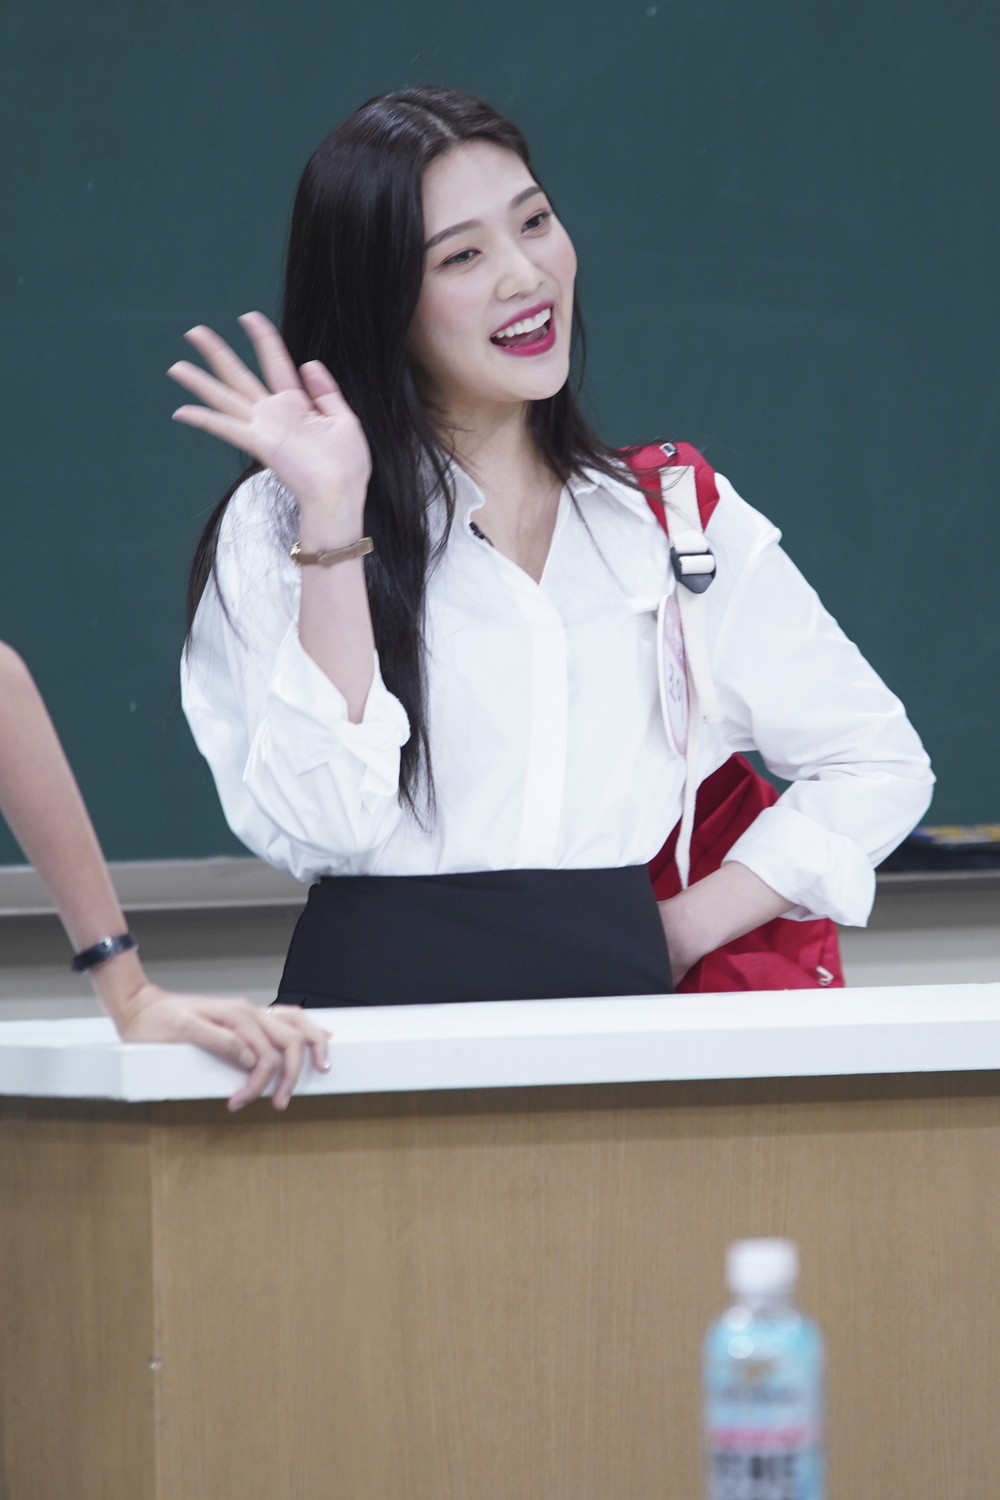 REDVelvet Joy transformed Kang Ho-dong to Idol.Model Jang Yoon-ju, model Irene and REDVelvet Joy will appear as transfer students on JTBC Knowing Bros broadcast on September 7th.The three give a big smile with positive energy and special chemistry.In a recent recording, the three challenge their brothers makeover.Jang Yoon-ju said that he would transform the Seo Jang-hoon, Irene Lee Soo-geun, and Joy Kang Ho-dong.Joy raised expectations by revealing his huge aspiration of making Kang Ho-dong Idol.When the makeover started, the back door that Kang Ho-dong was even spied on Joys serious appearance.emigration site